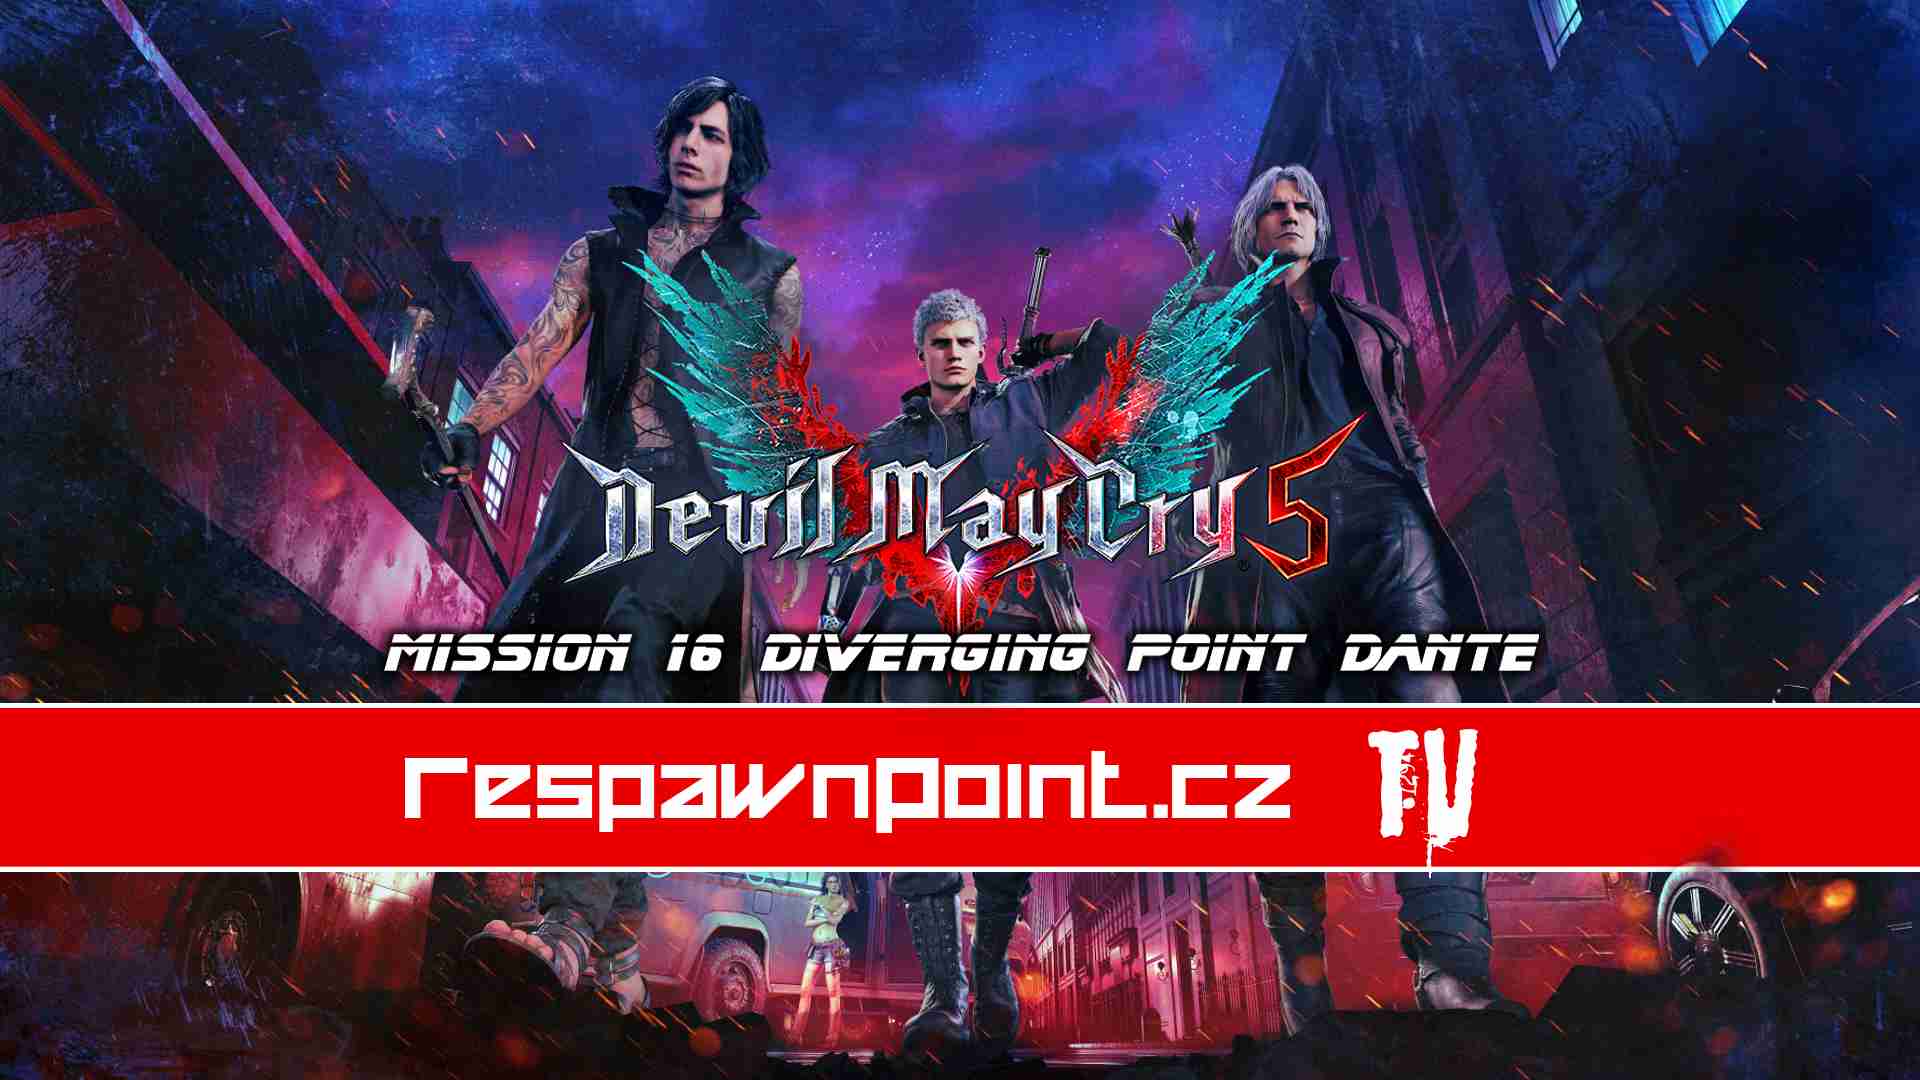 Devil May Cry 5 – Mission 16: Diverging Point Dante – Gameplay